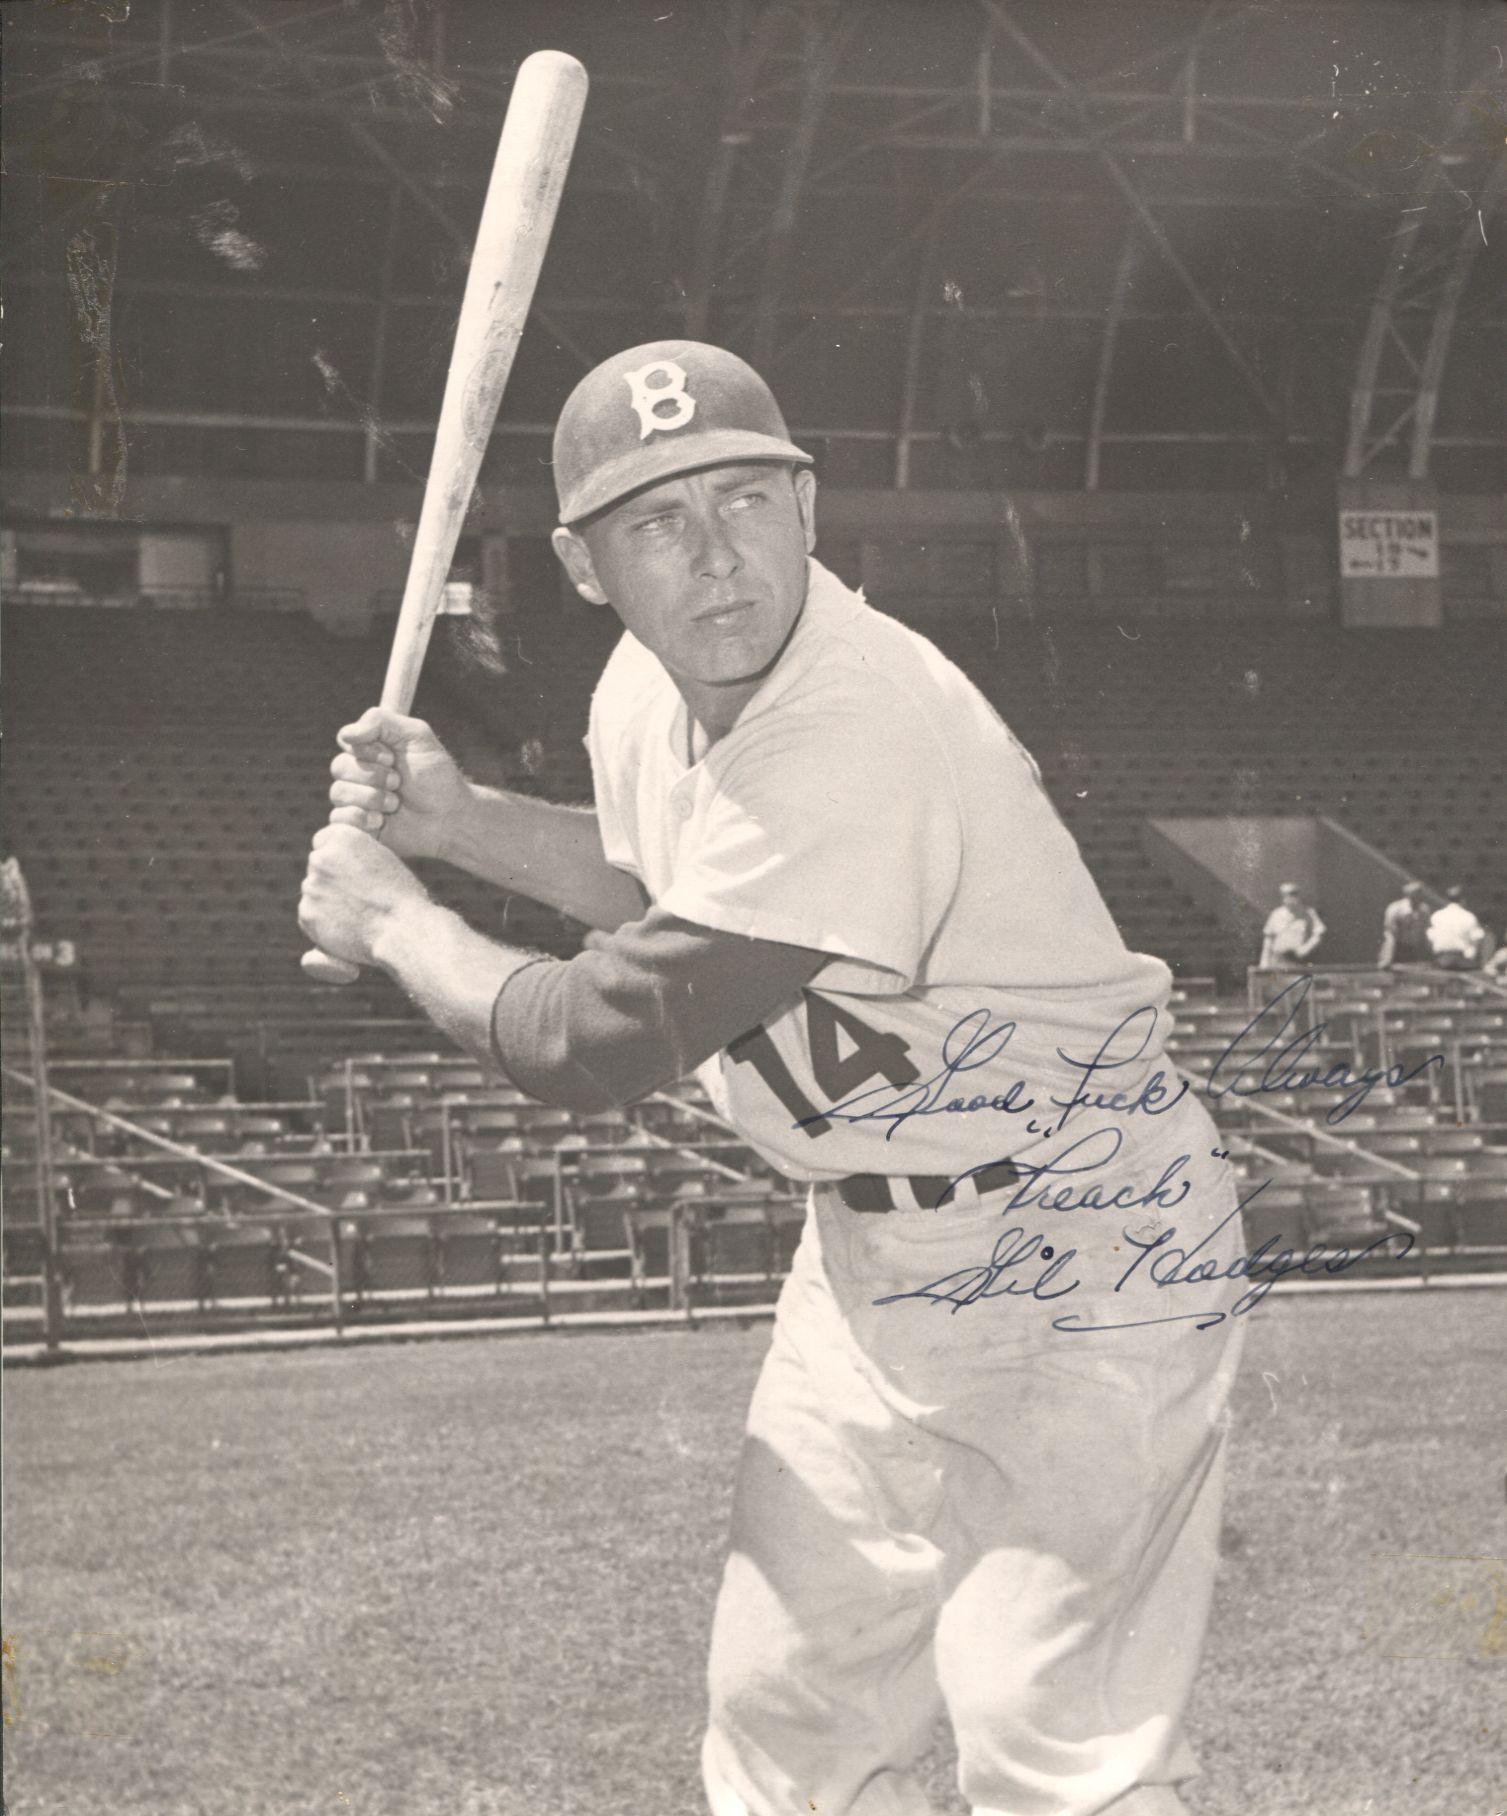 Gil Hodges was a star baseball player with the Brooklyn and Los